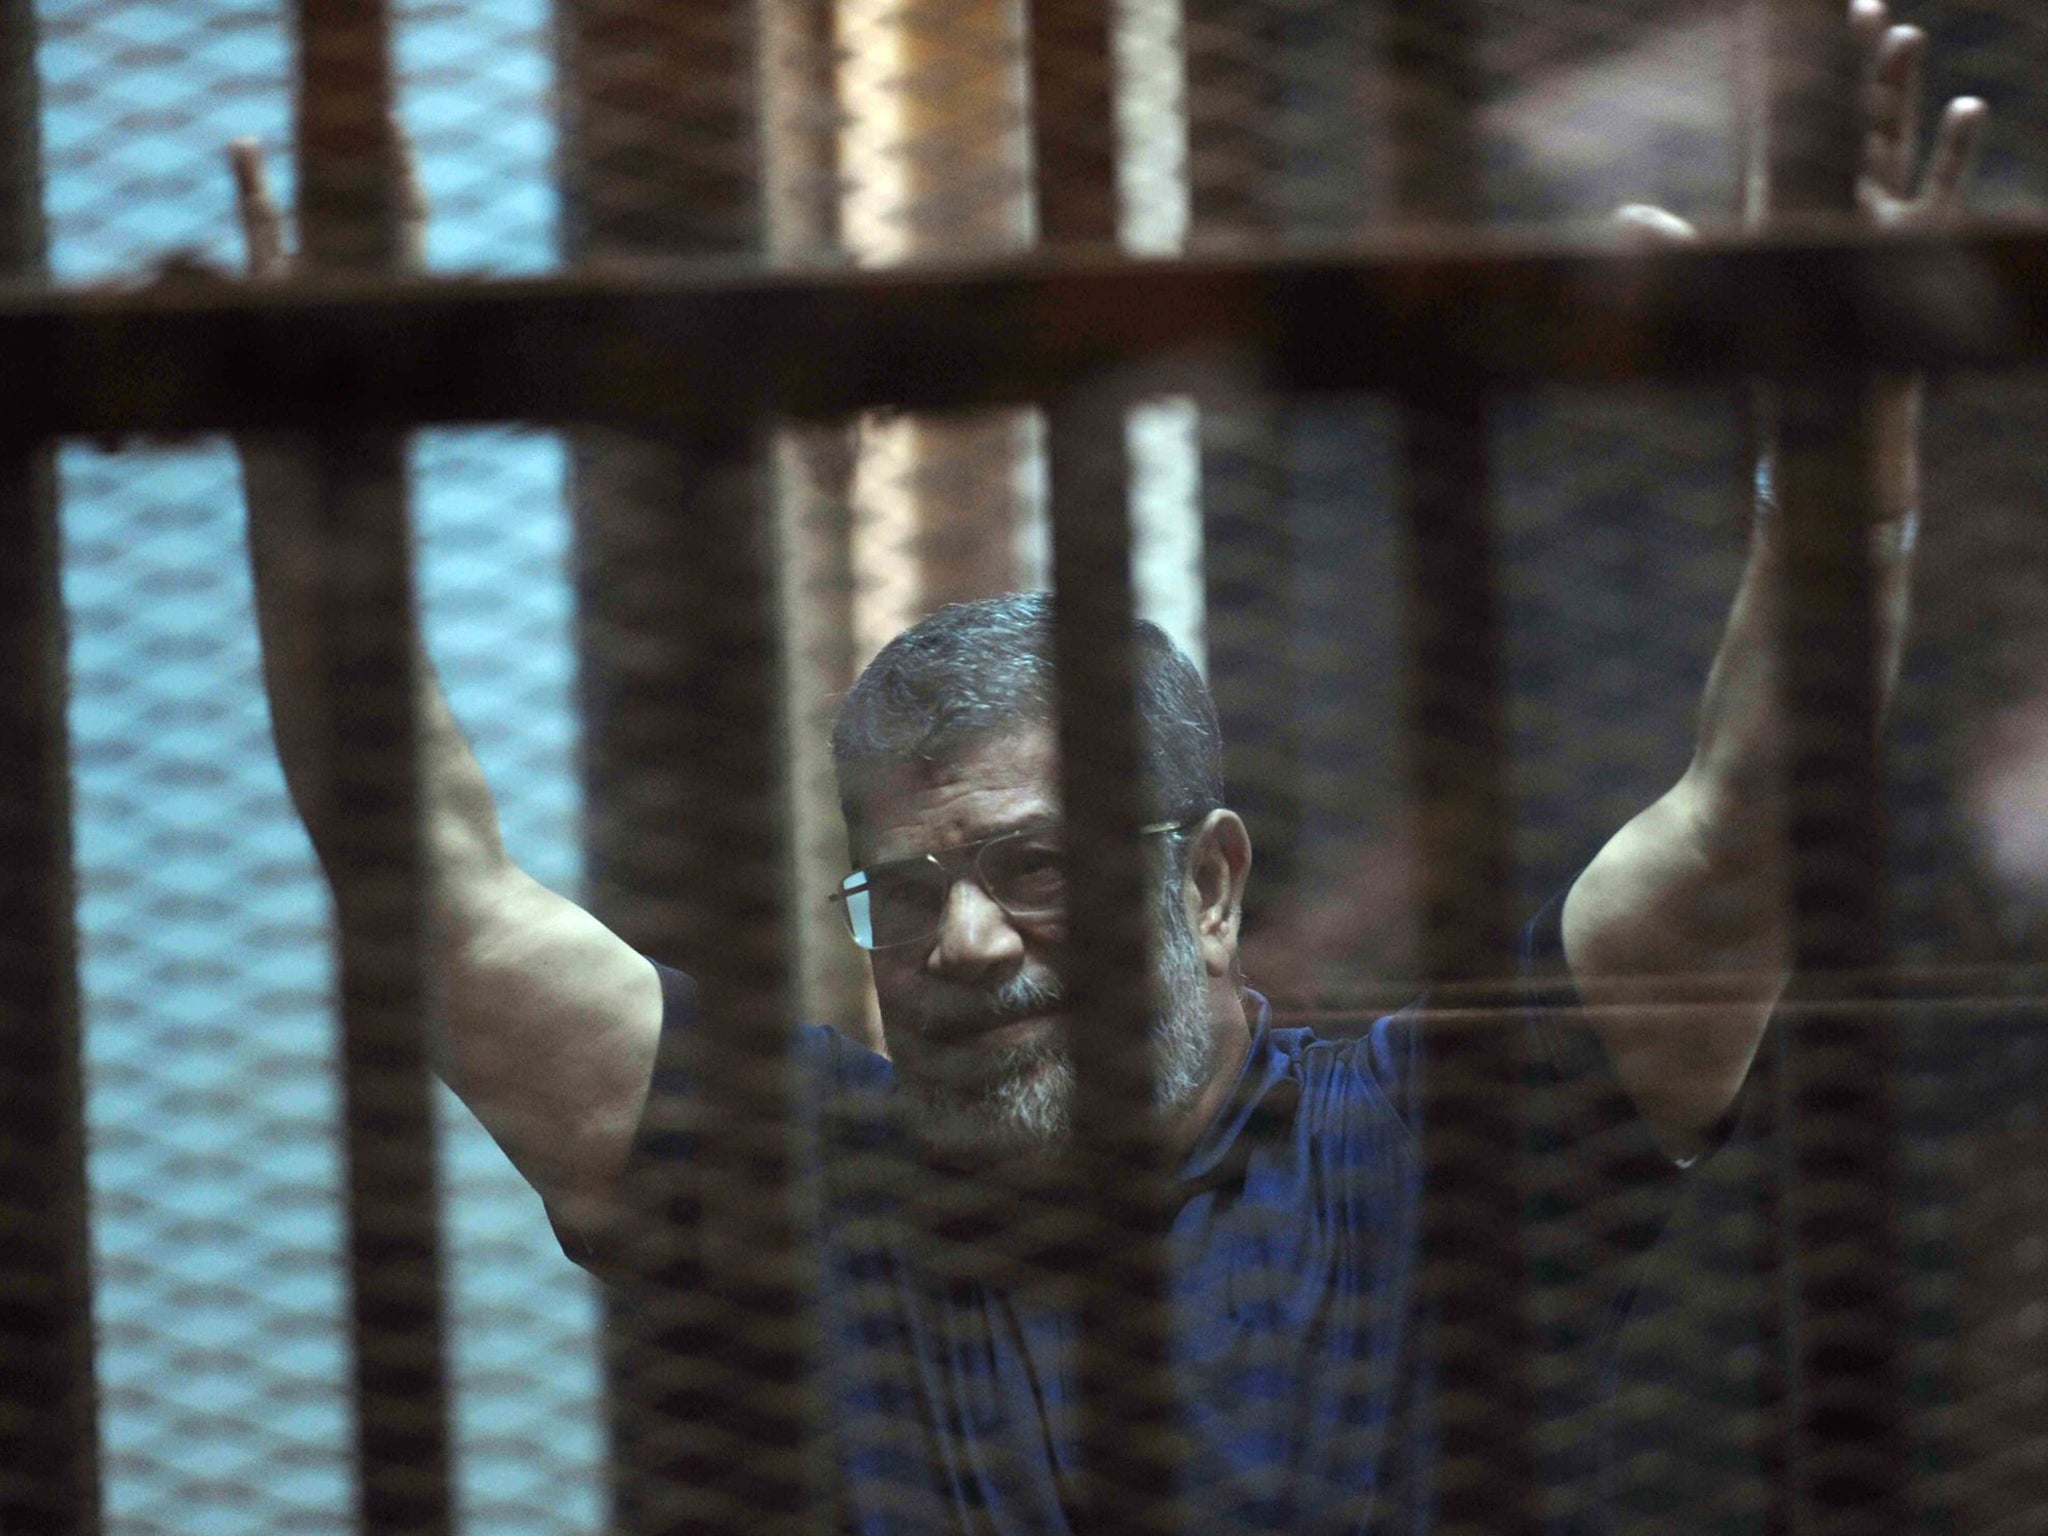 Former leader Mohamed Morsi was sentenced to death in Cairo in May